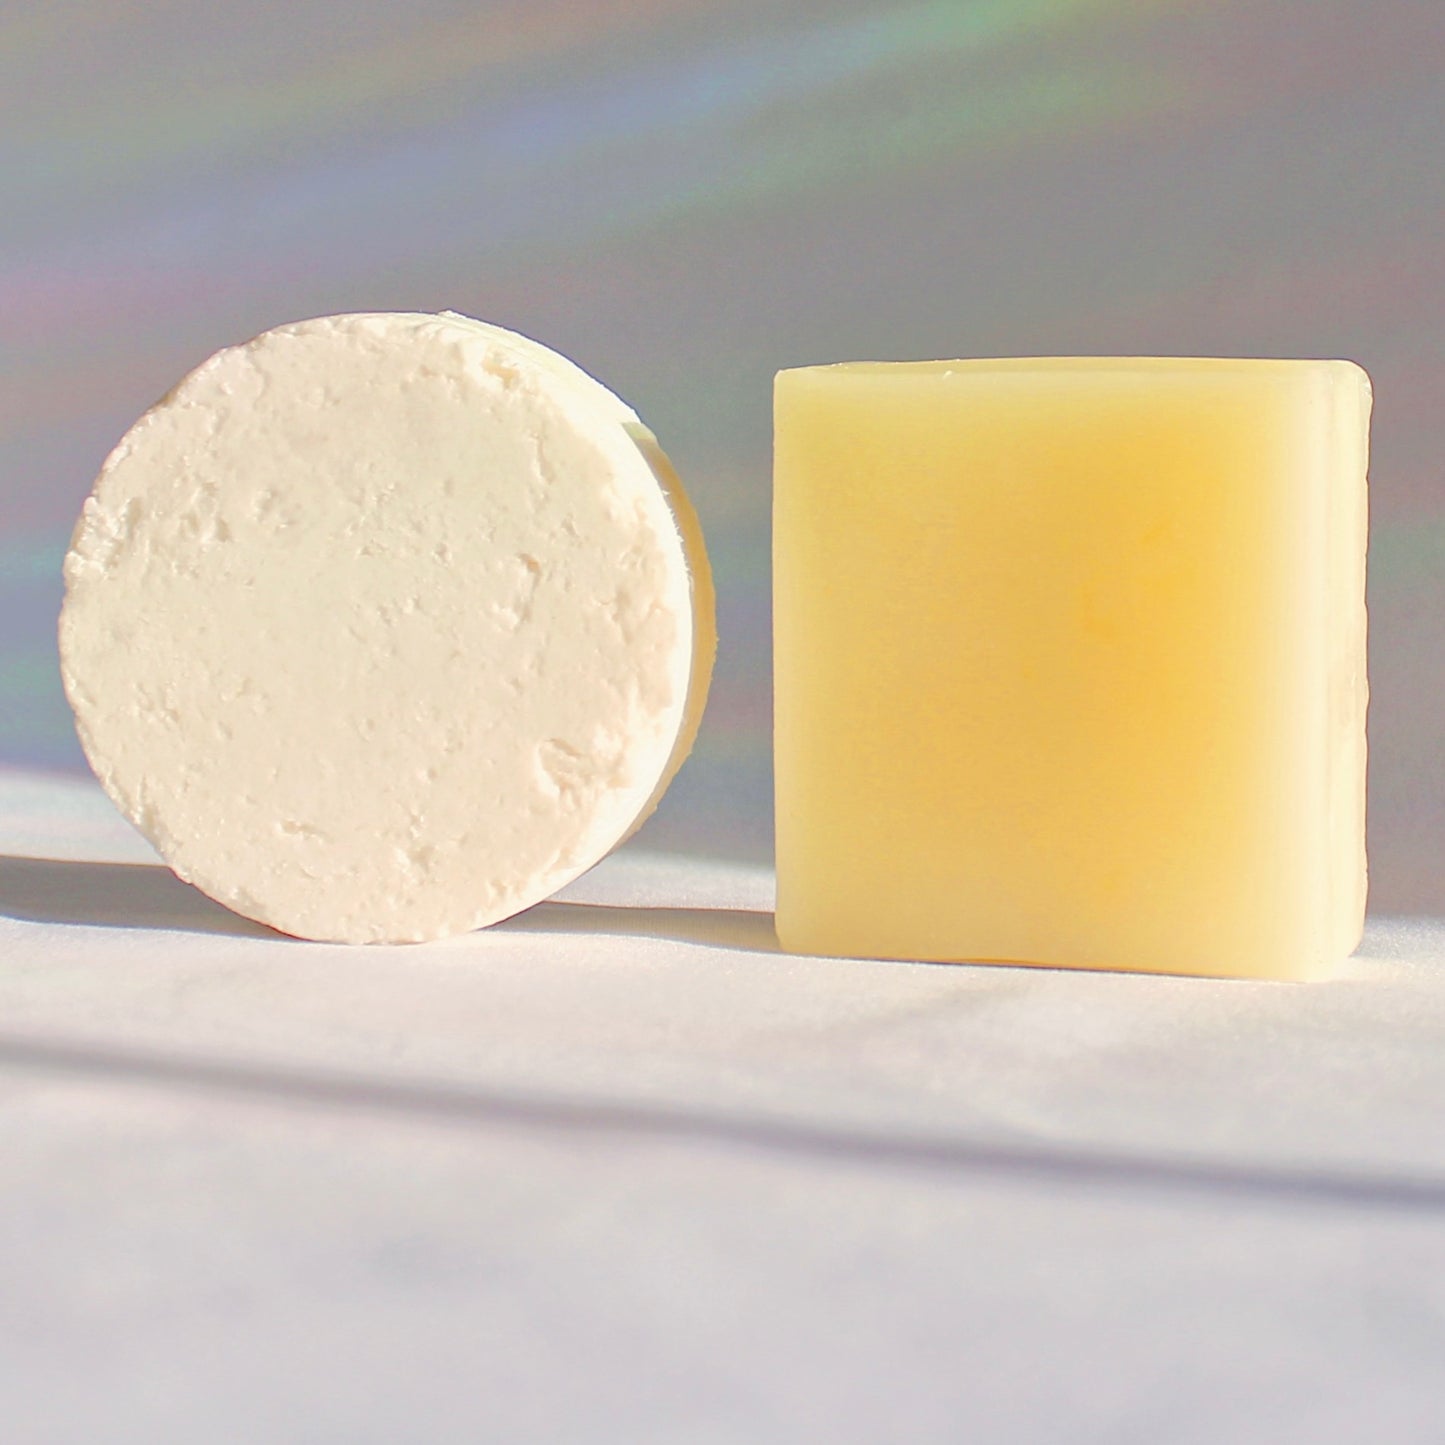 RICE SHINE Shampoo + Conditioner Bar  Normal | Dry Hair - DRENCHEDskin®